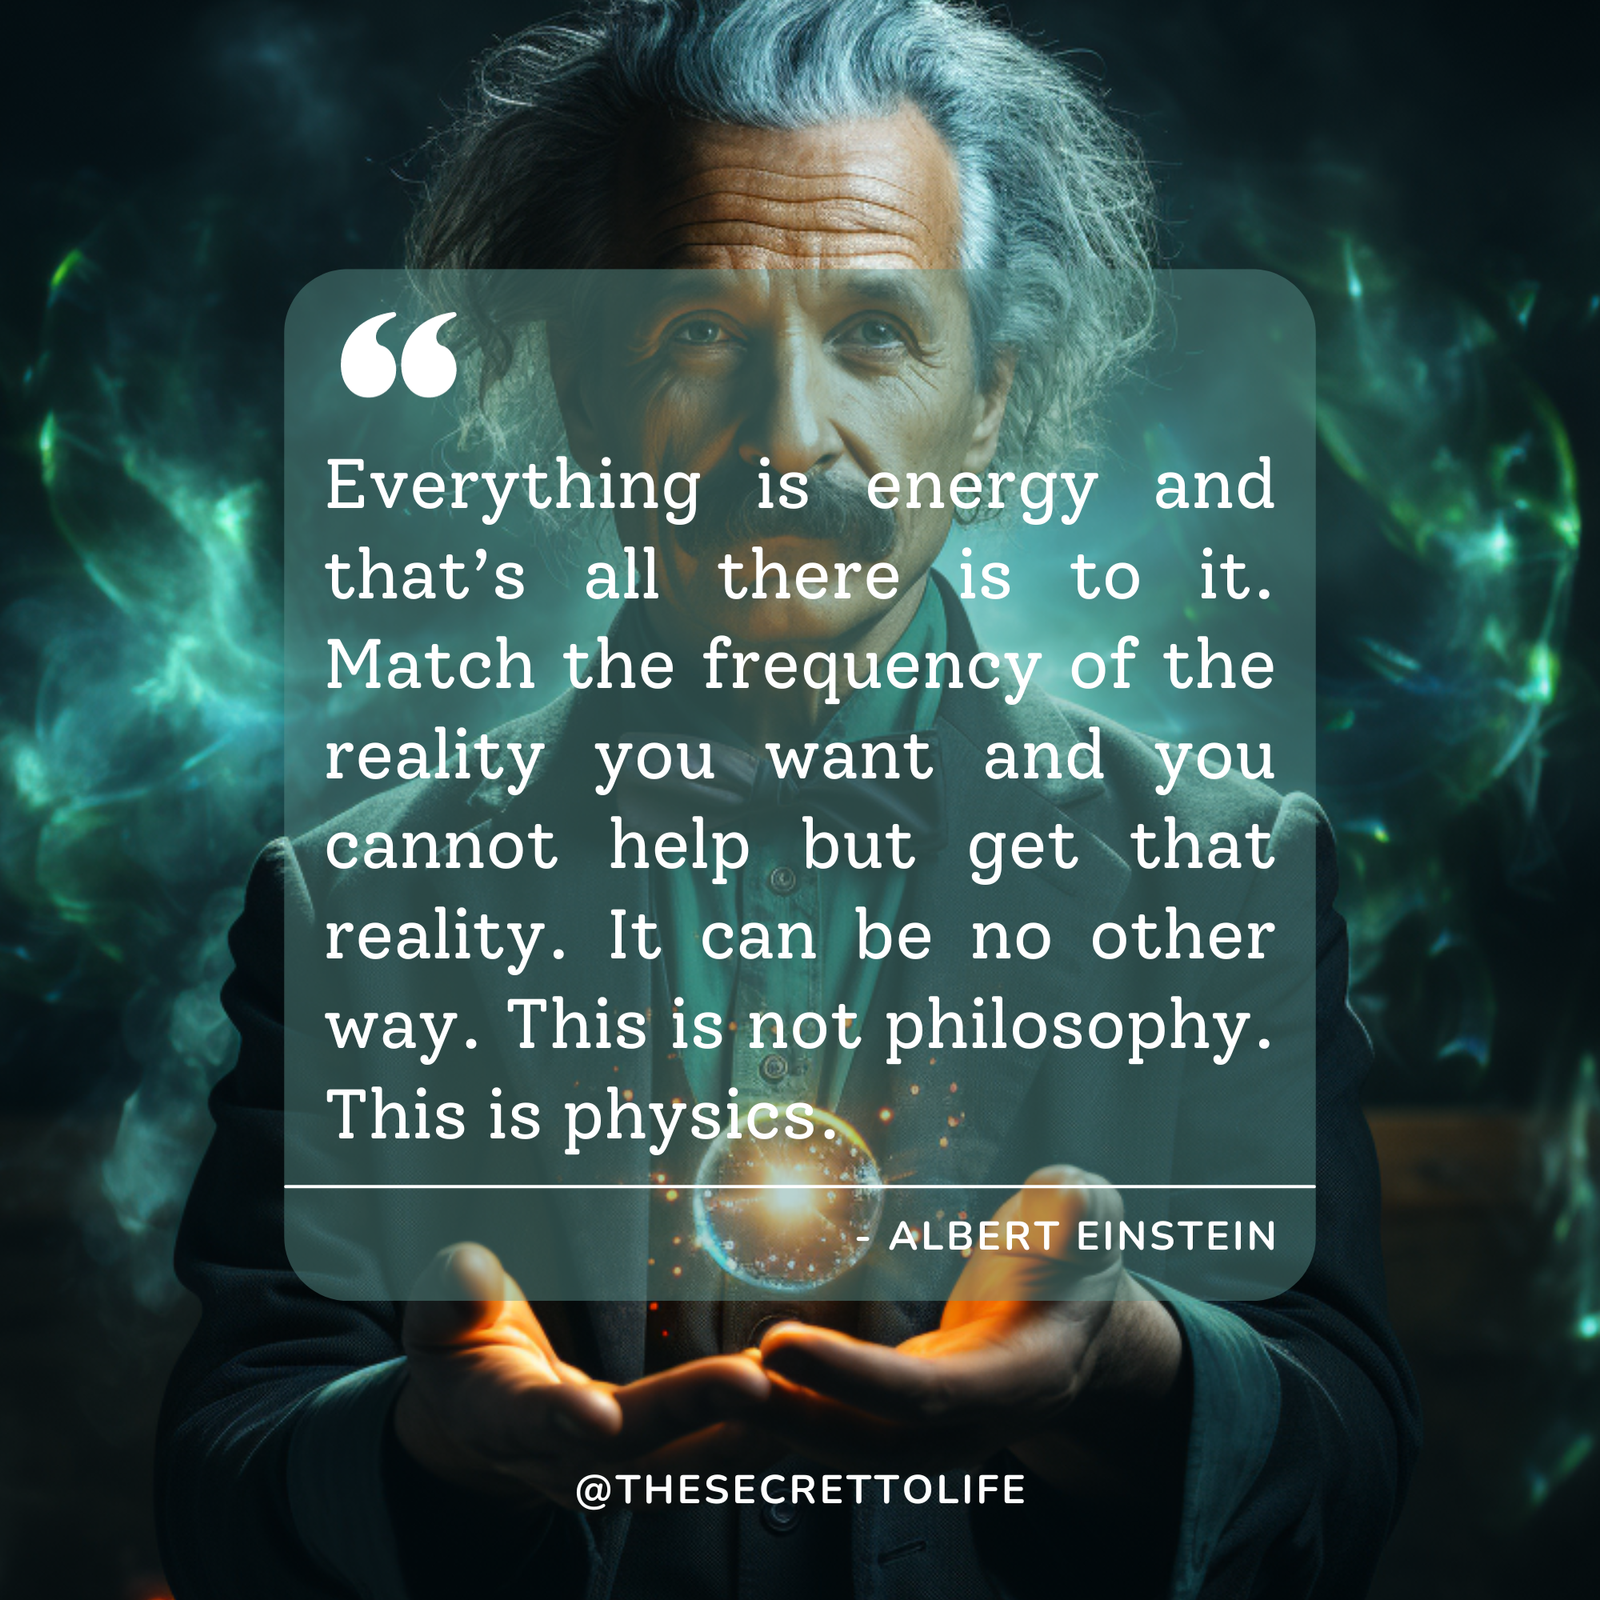 Albert Einstein holding a ball of glowing energy that floats above his hands. He offers this energy to you and recites his famous quote about how everything is energy. Urging you to learn how to vibrate correclty.